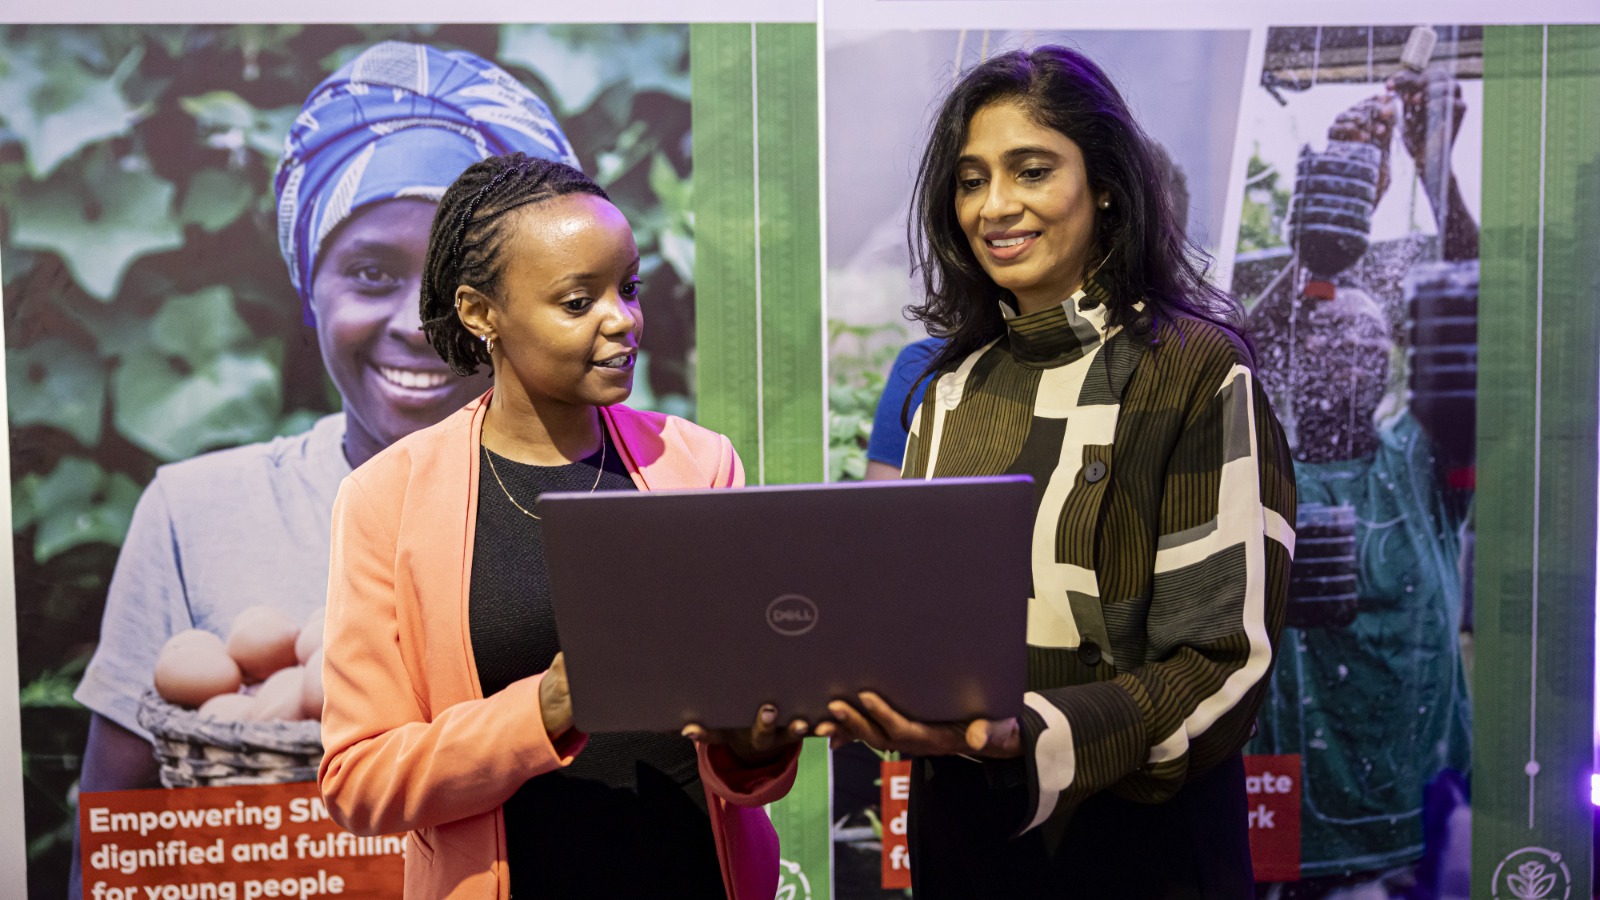 Ethiopia: Mastercard Calls for Proposals from African SMEs and Entrepreneurs in the Agricultural Sector